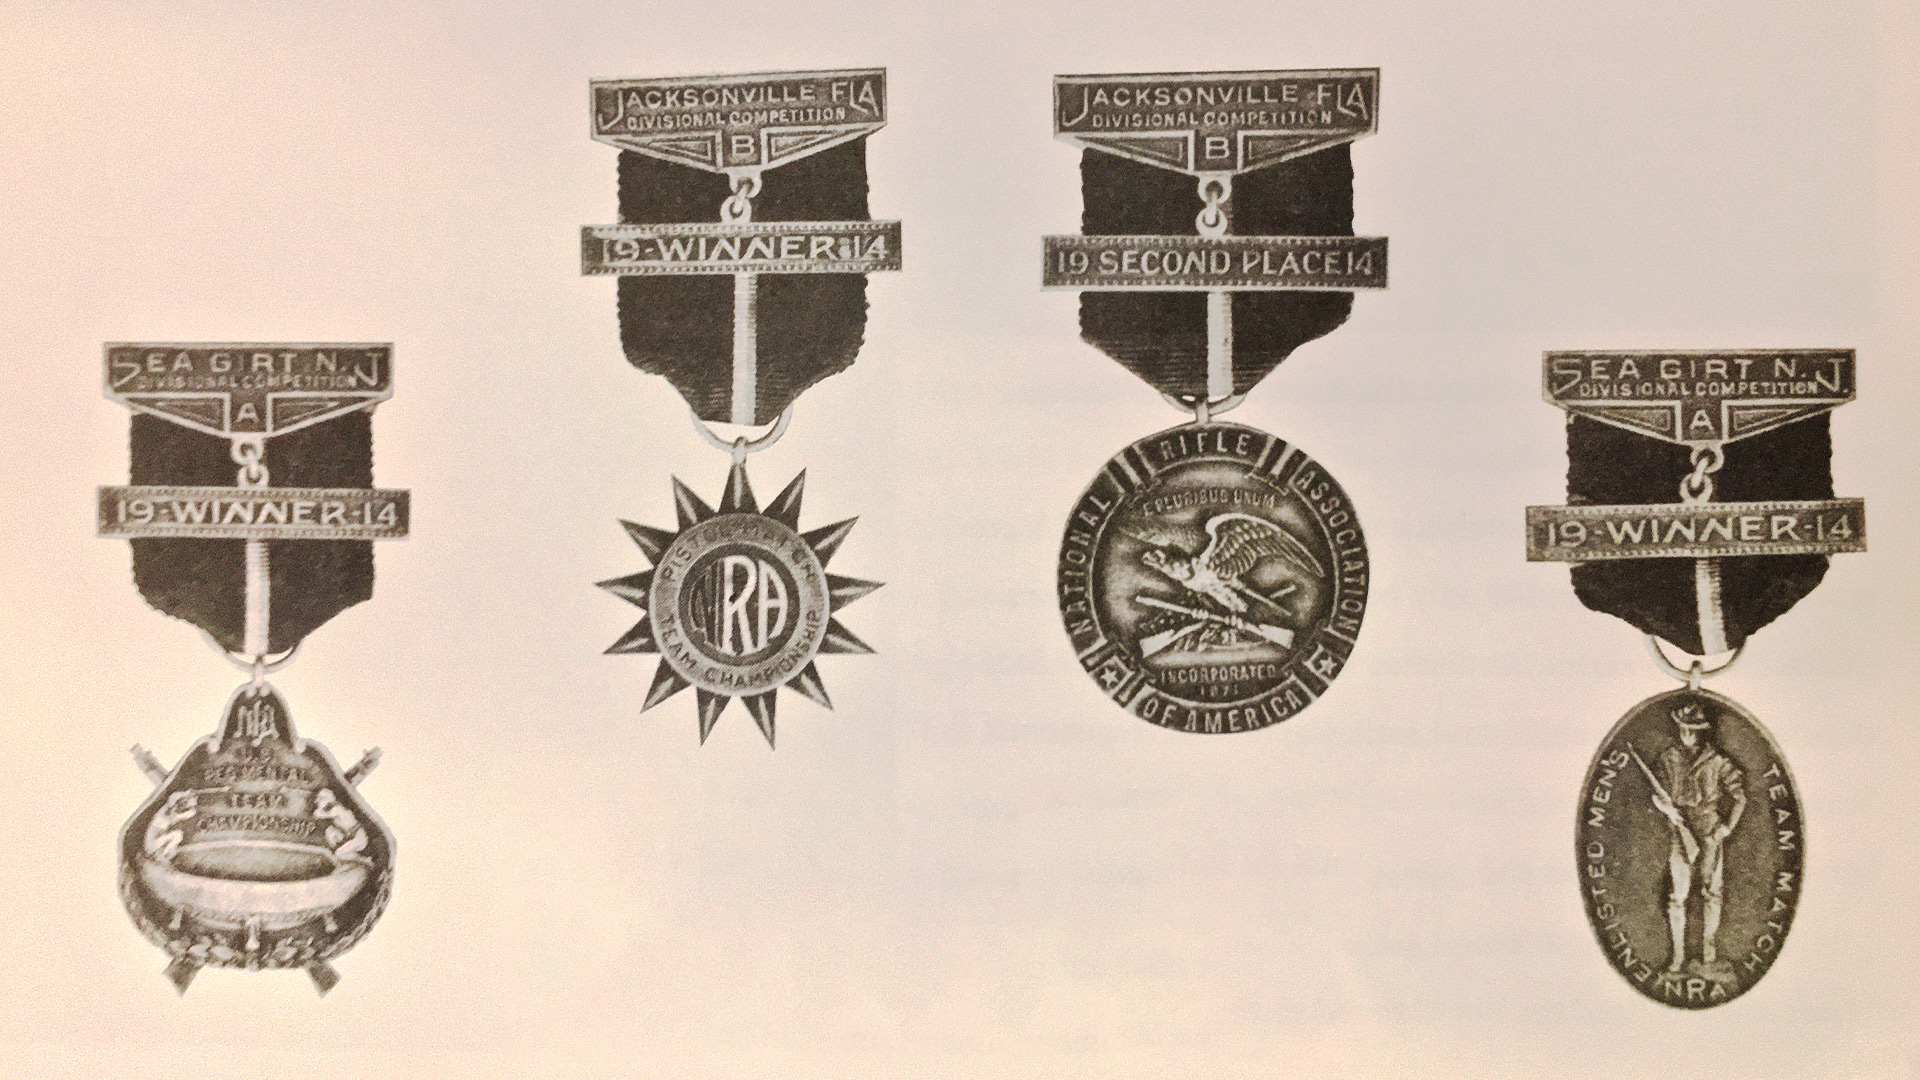 1914 NRA National Divisional Matches Medals